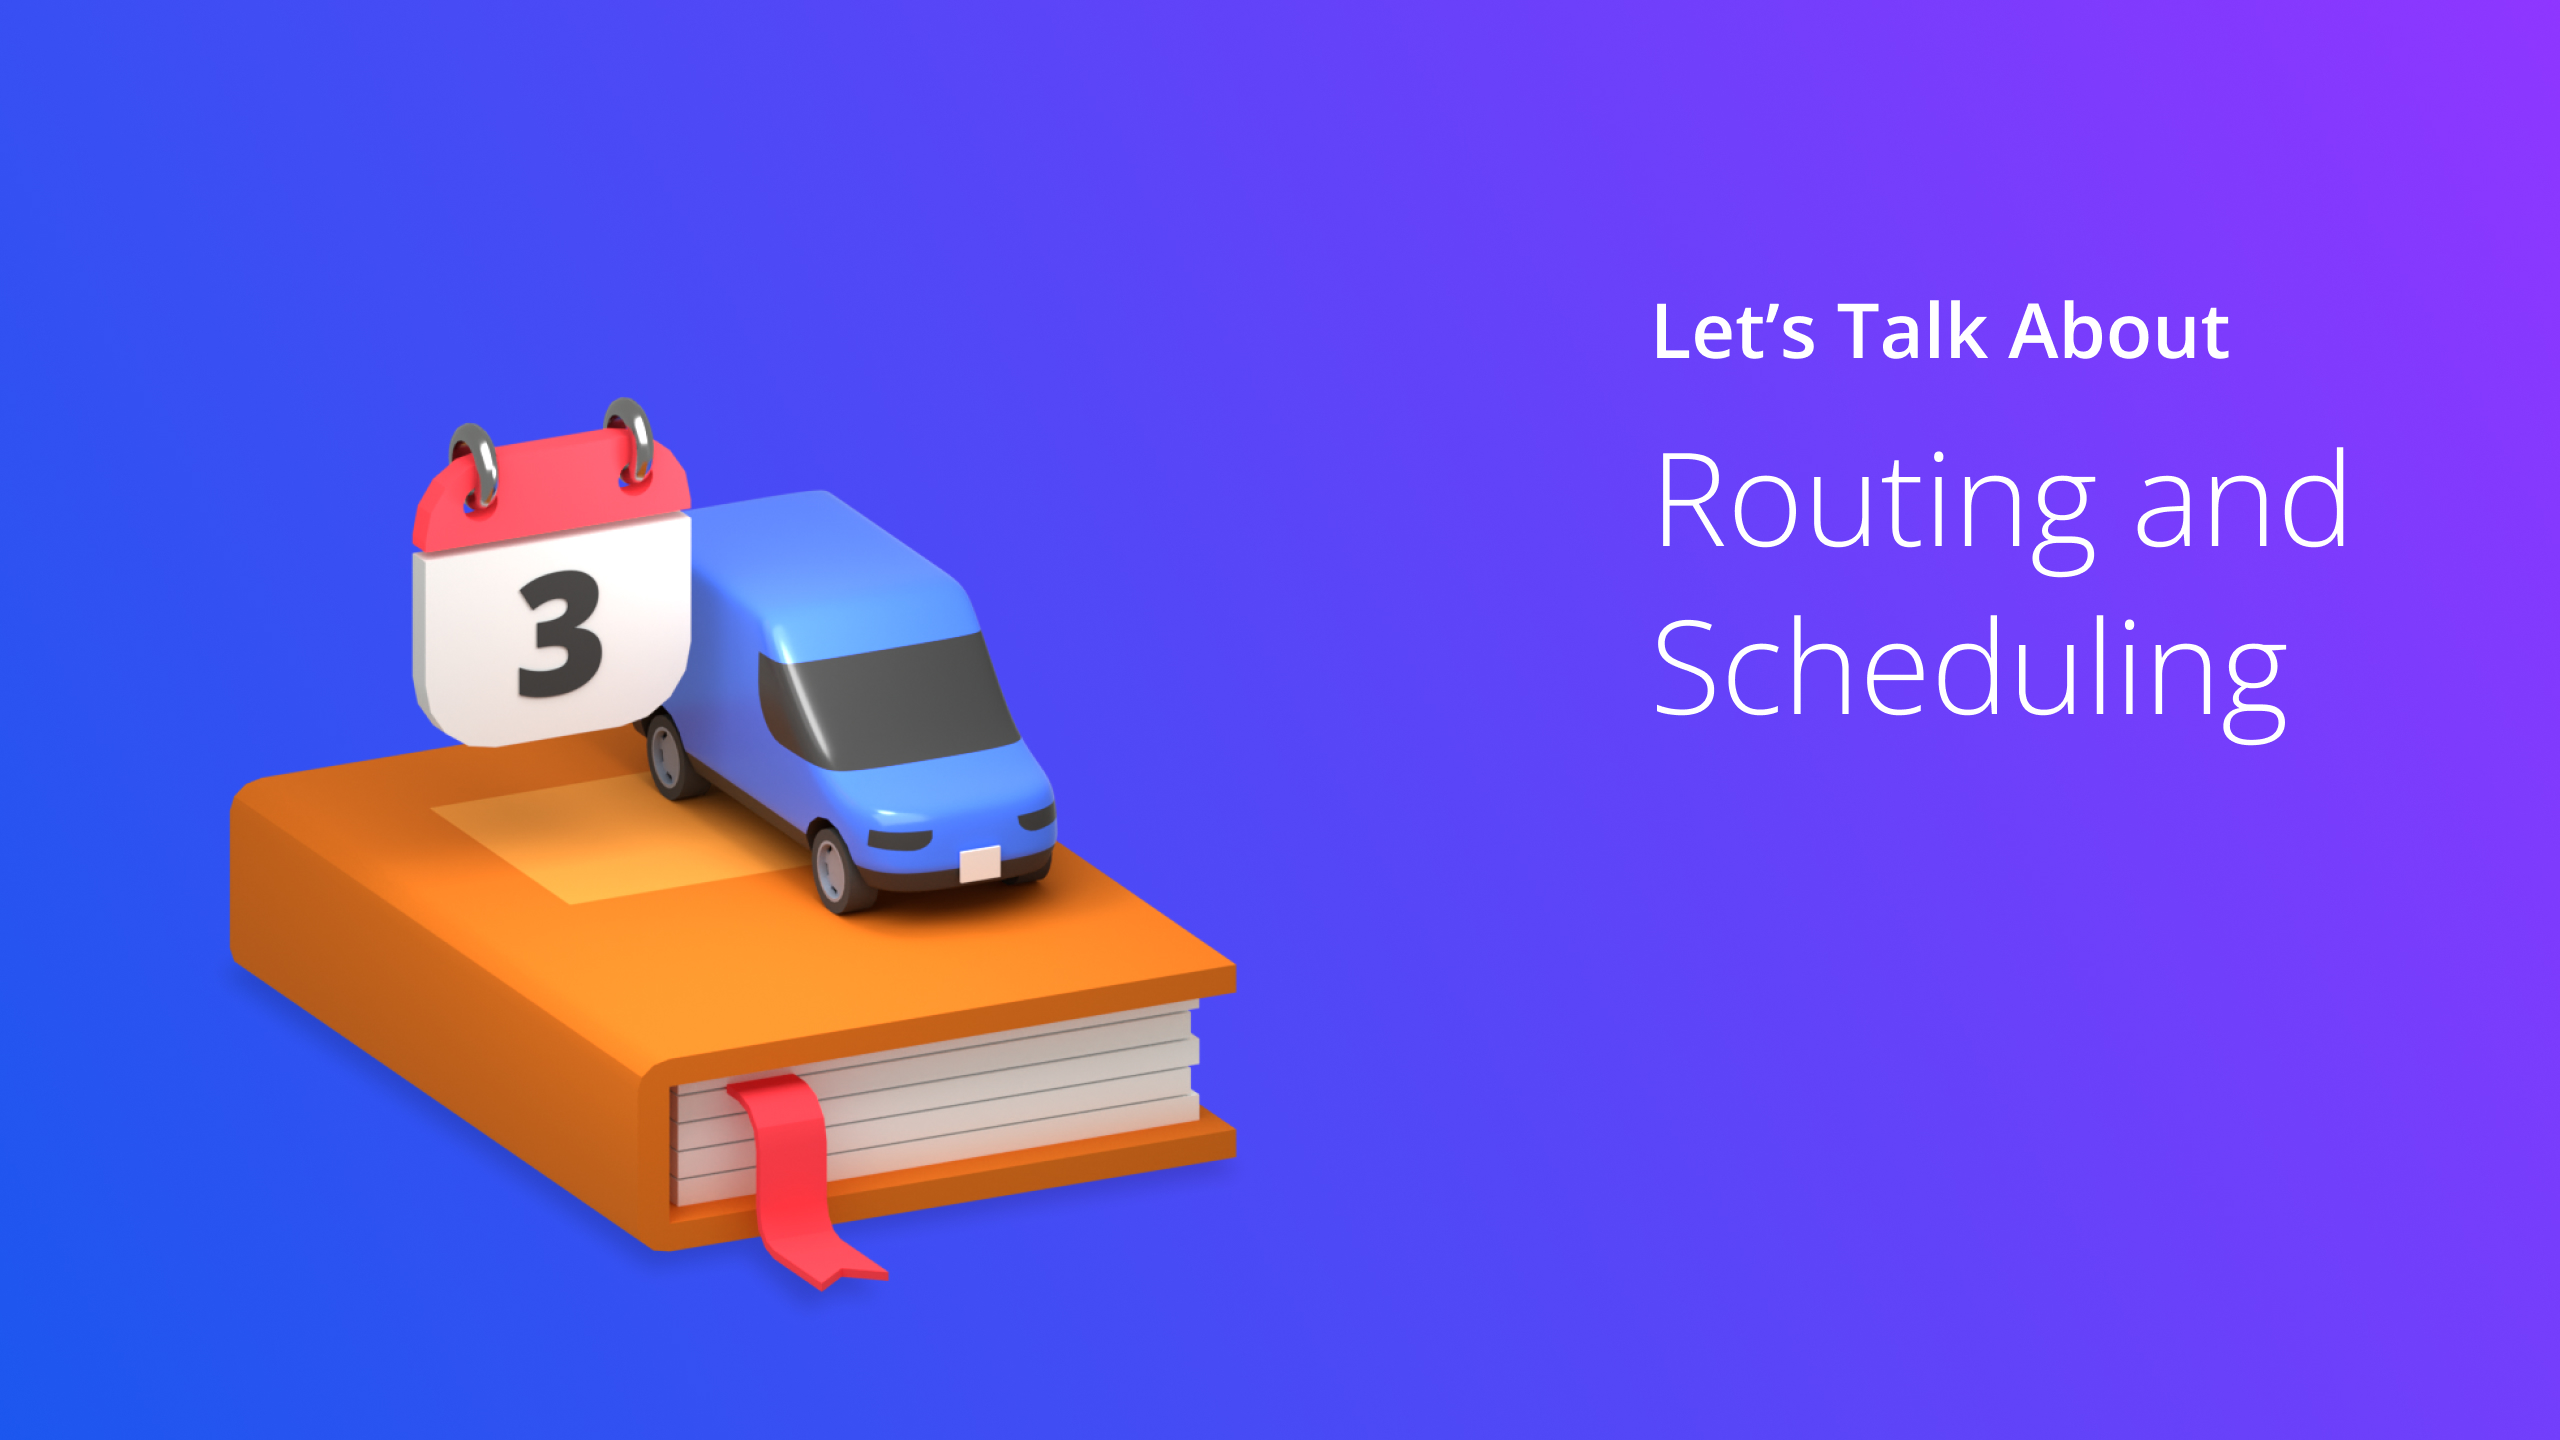 Custom Image - Let's Talk About Routing And Scheduling